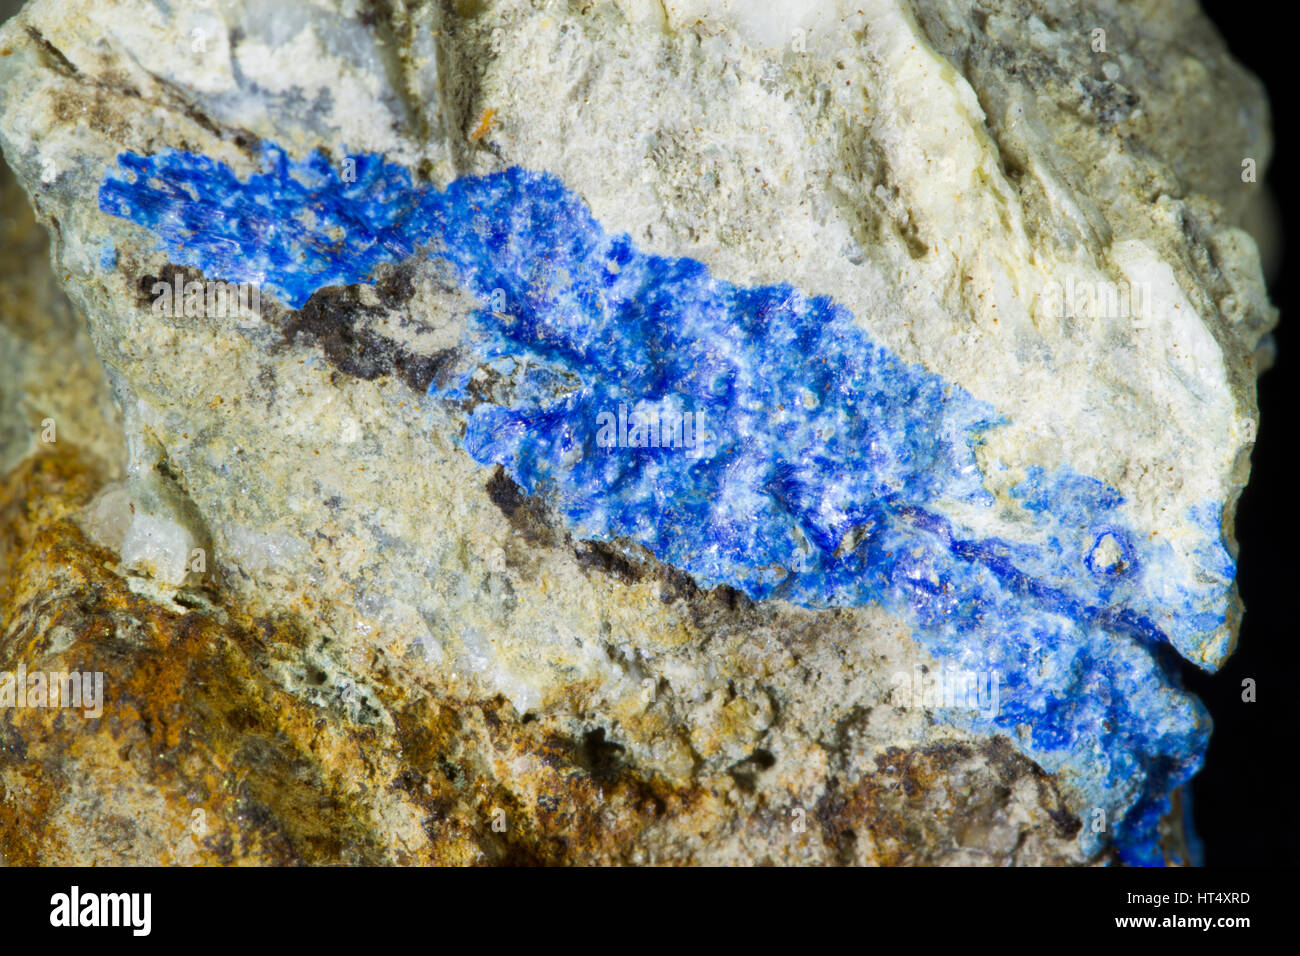 Linarite mineral (Lead Copper Sulphate Hydroxide) encrusting a rock sample. From the Daren mine, Goginan, Ceredigion Wales. Stock Photo